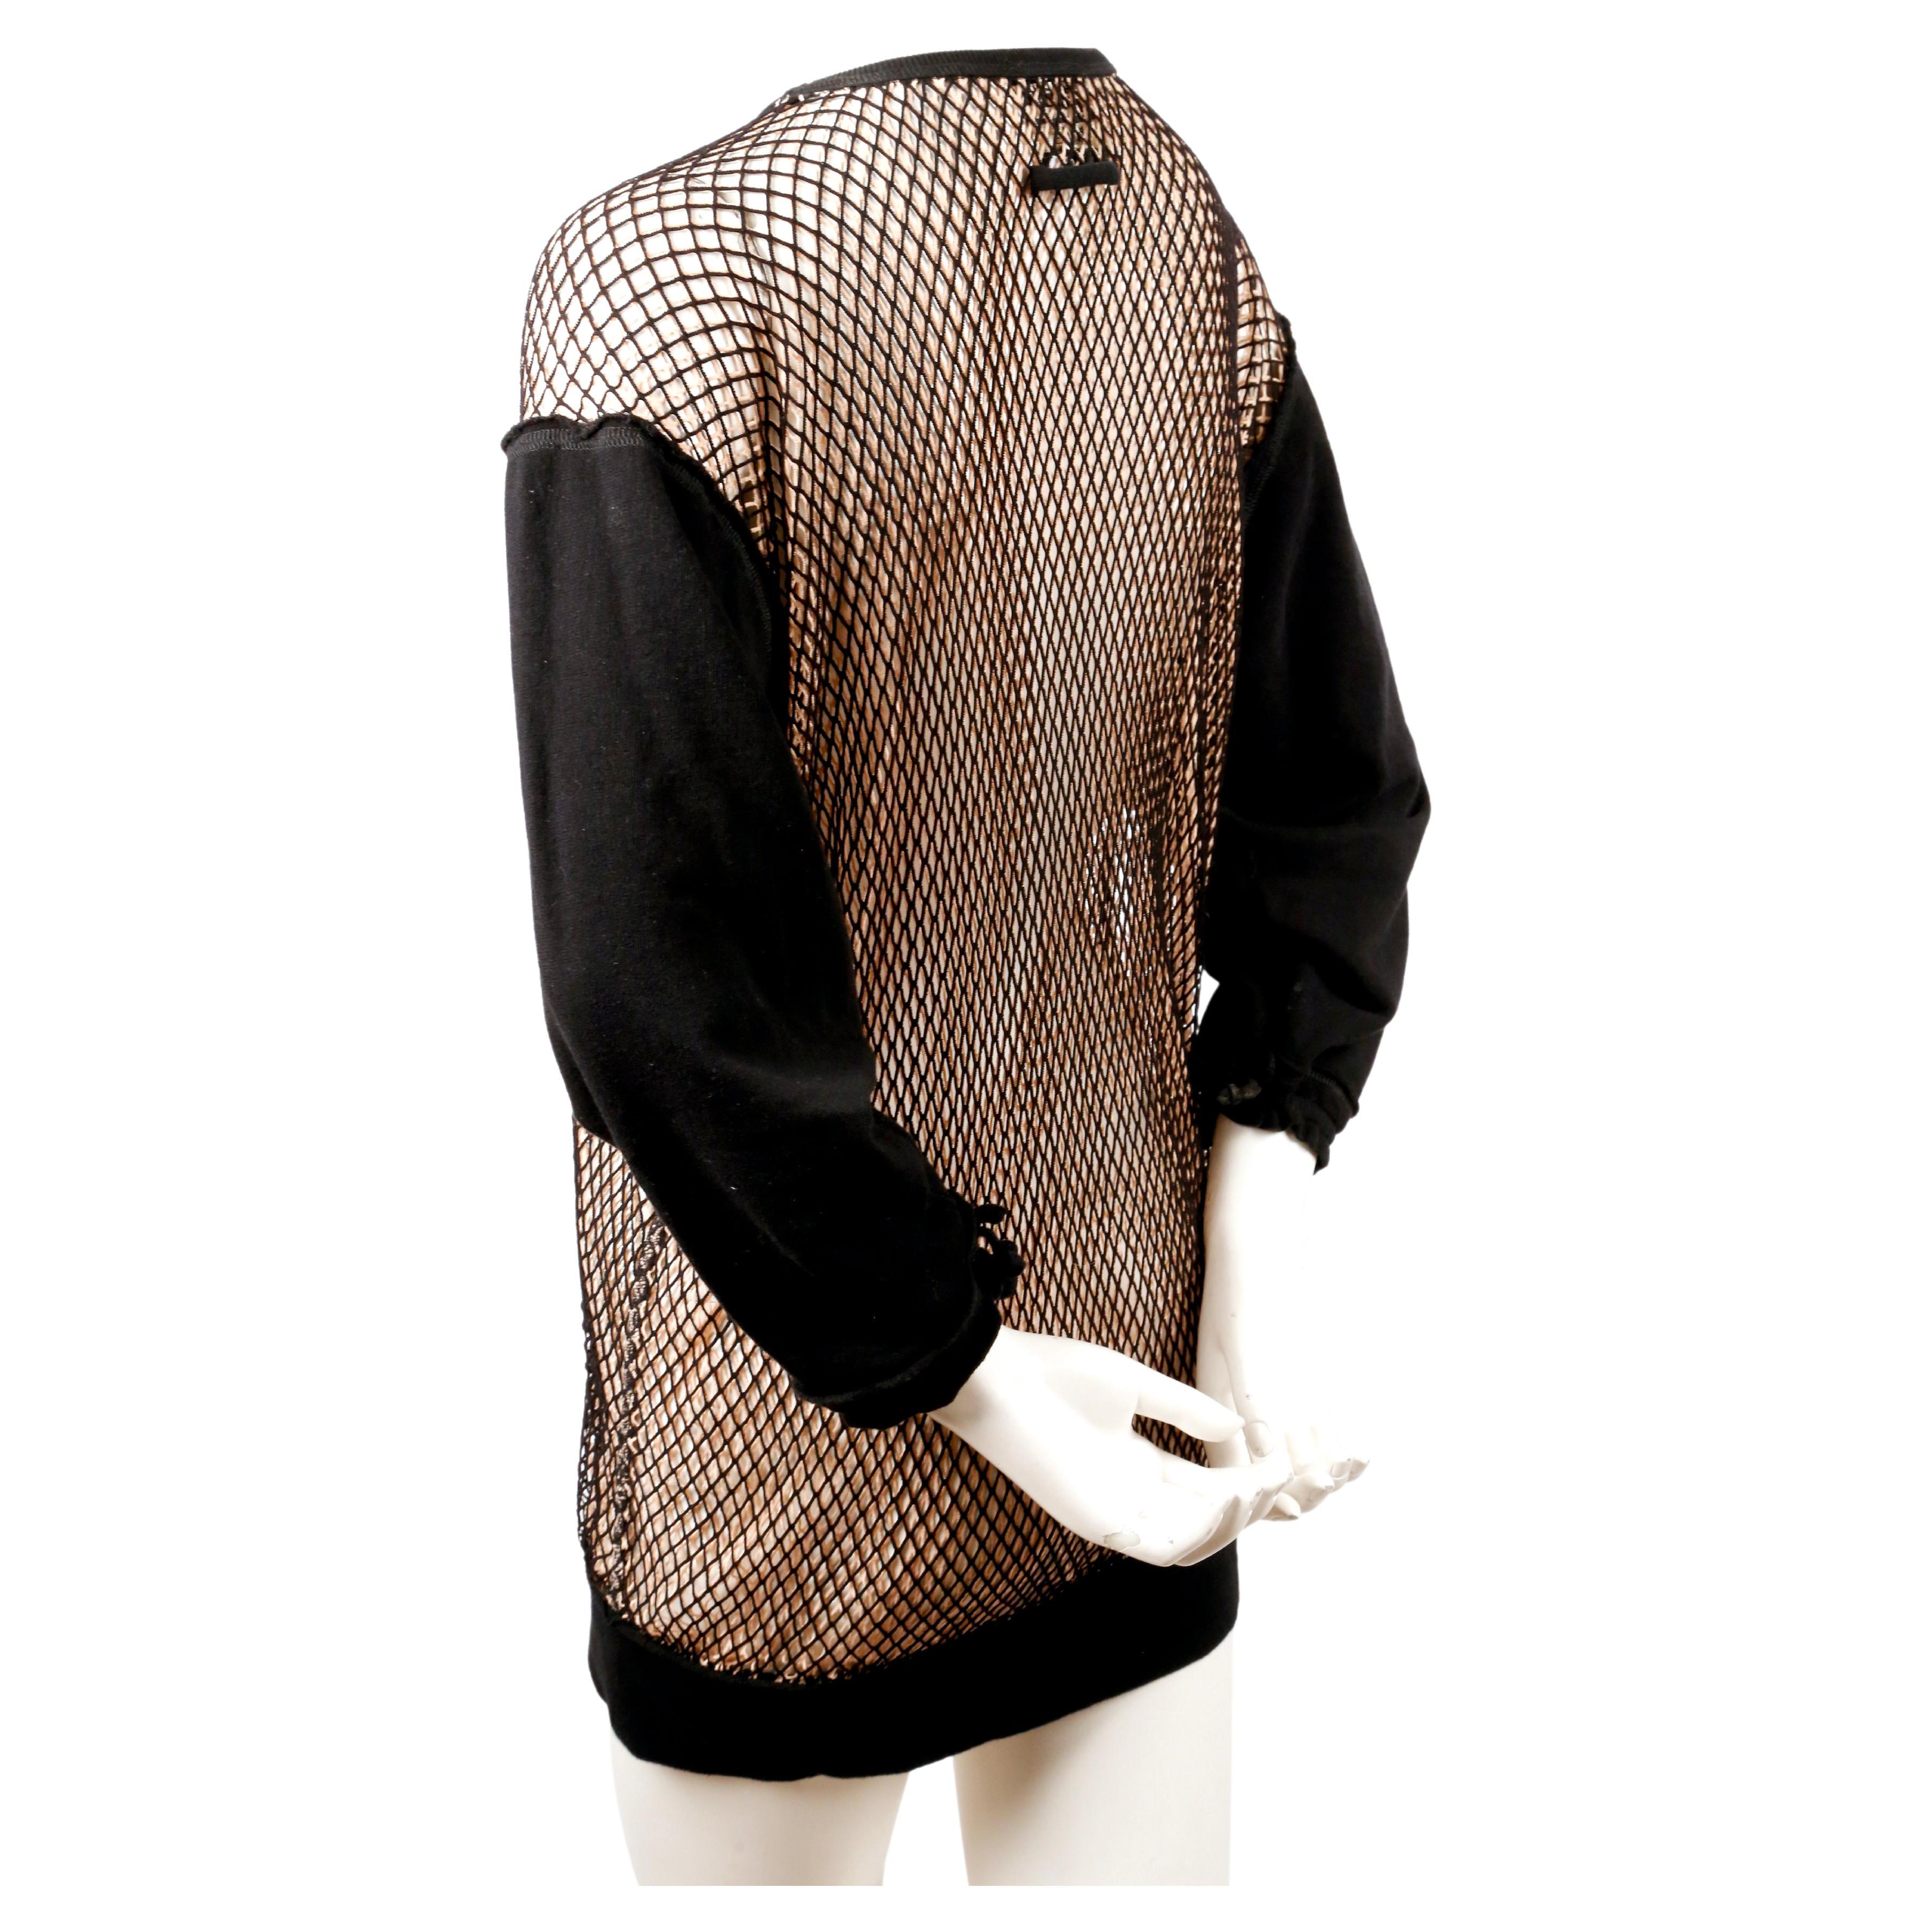 Nude and black layered 'fishnet' tunic designed by Jean Paul Gaultier dating to spring of 2013 exactly as seen on the runway. Tunic is composed of two layers one black and the other nude, of fishnet.  Labeled a size 'M'.  Approximate measurements: